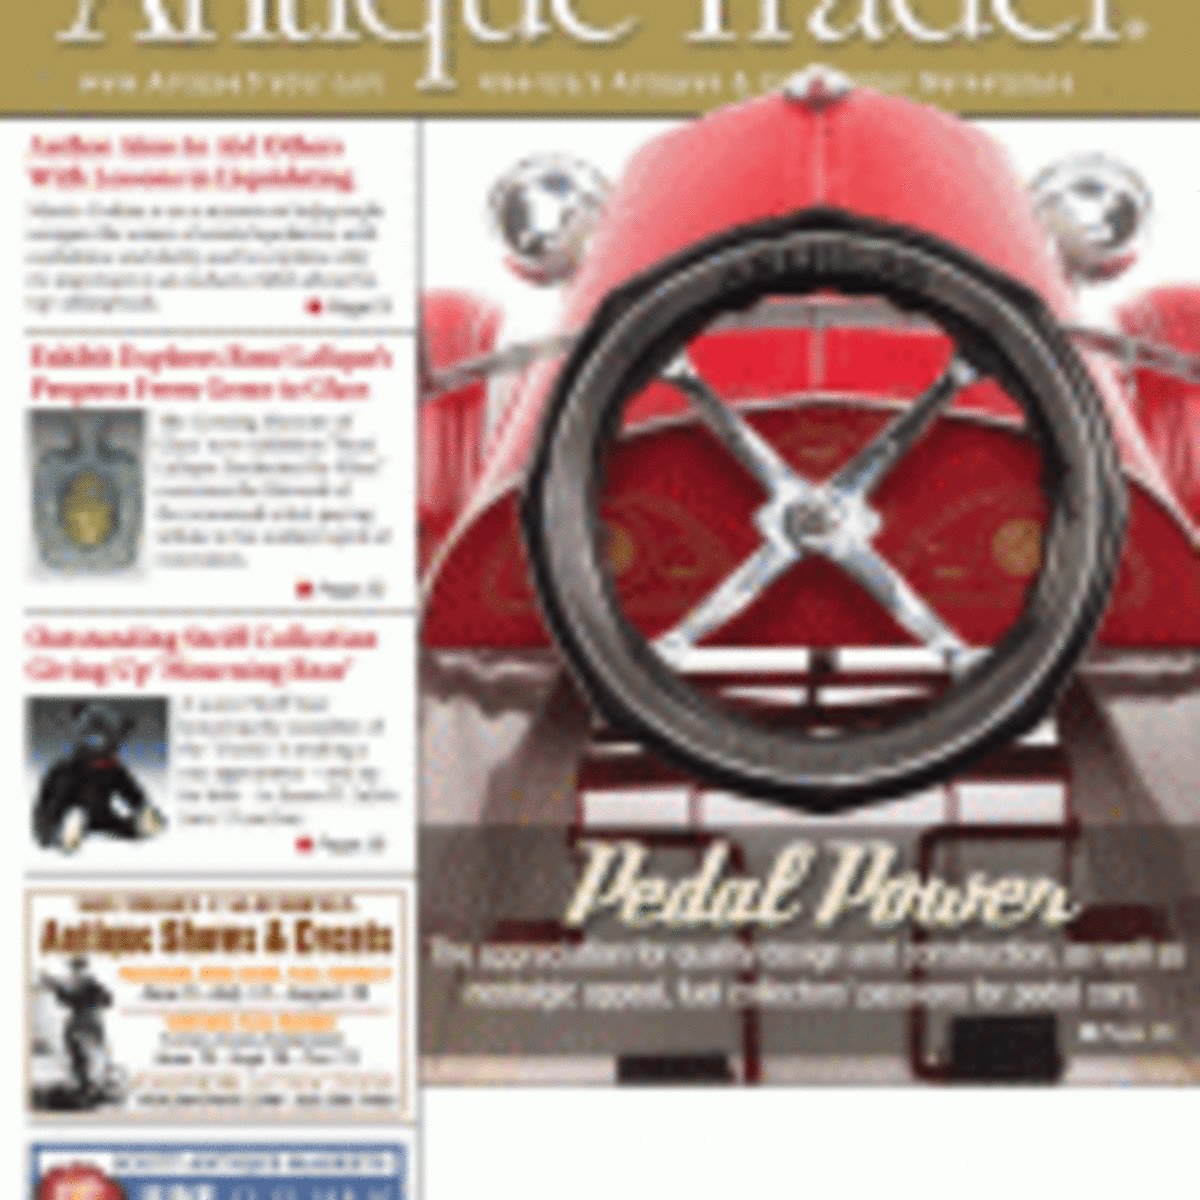 May 28, 2014 issue of Antique Trader magazine features a cover story about pedal cars. Purchase a digital copy of this issue at KrauseBooks.com >>>